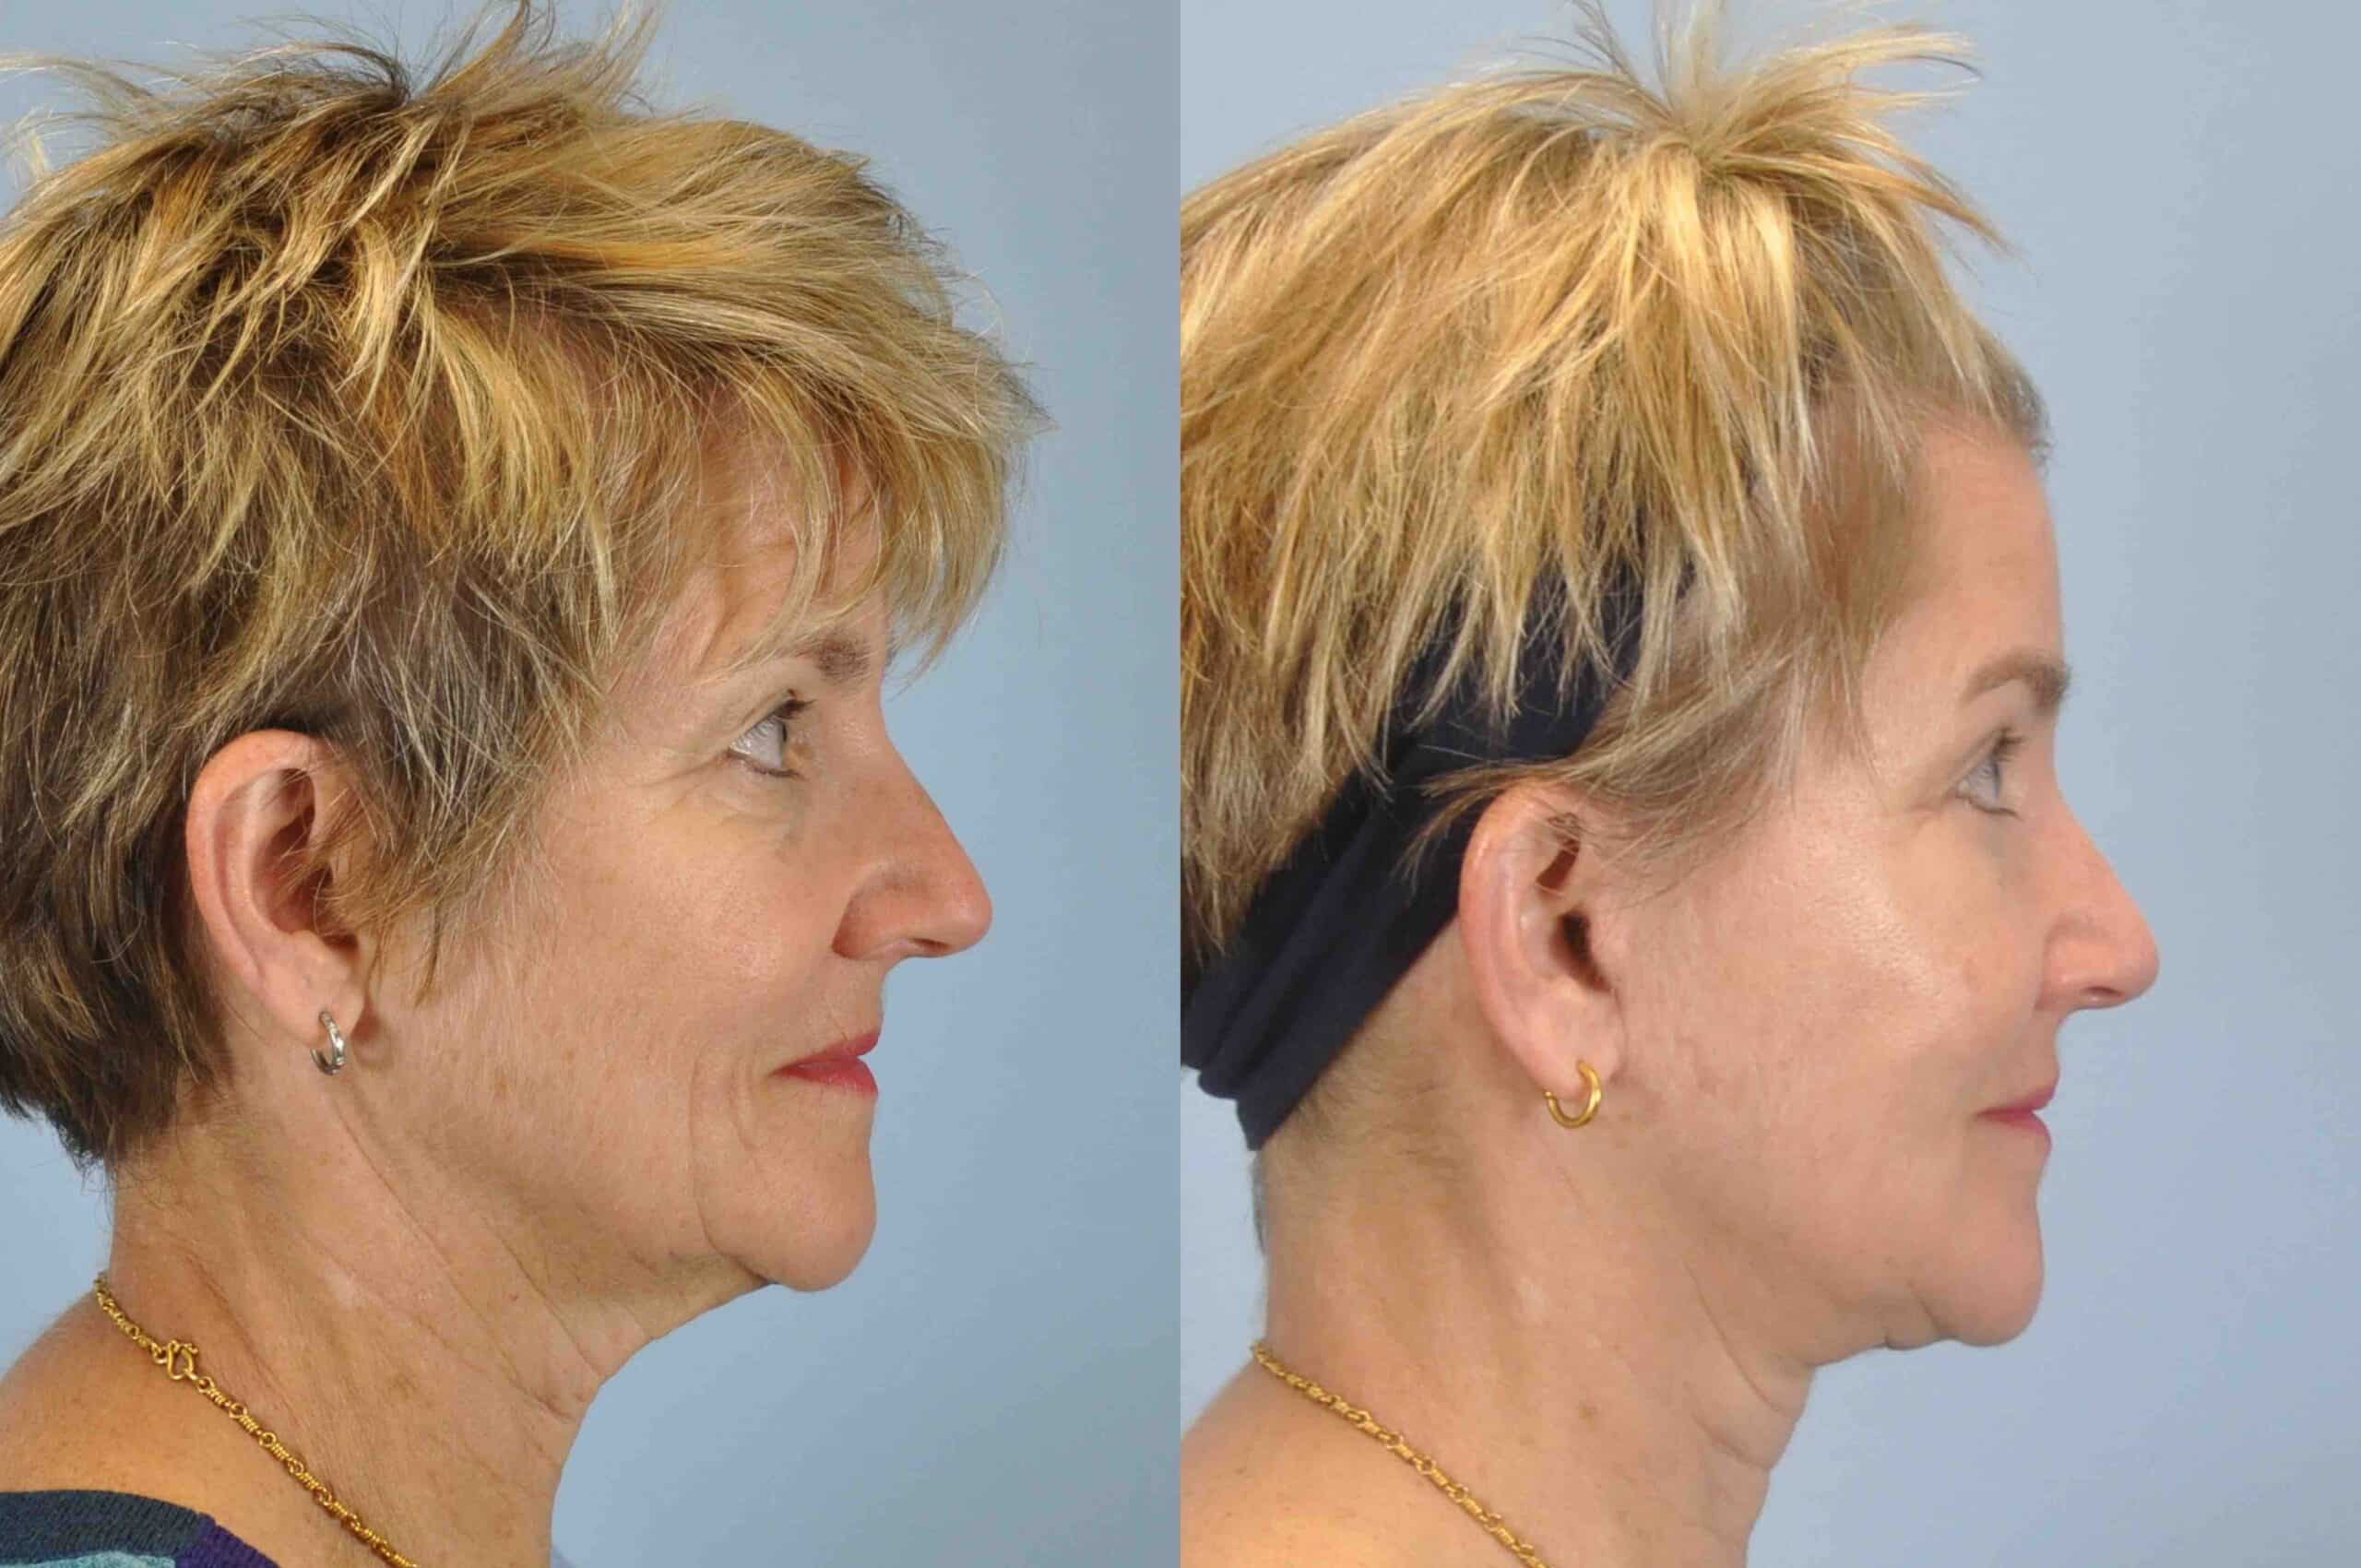 Before and after, patient 3 mo post op form Upper and Lower Blepharoplasty, Autologous Fat Transfer to Face, Facelift, Neck Lift performed by Dr. Paul Vanek